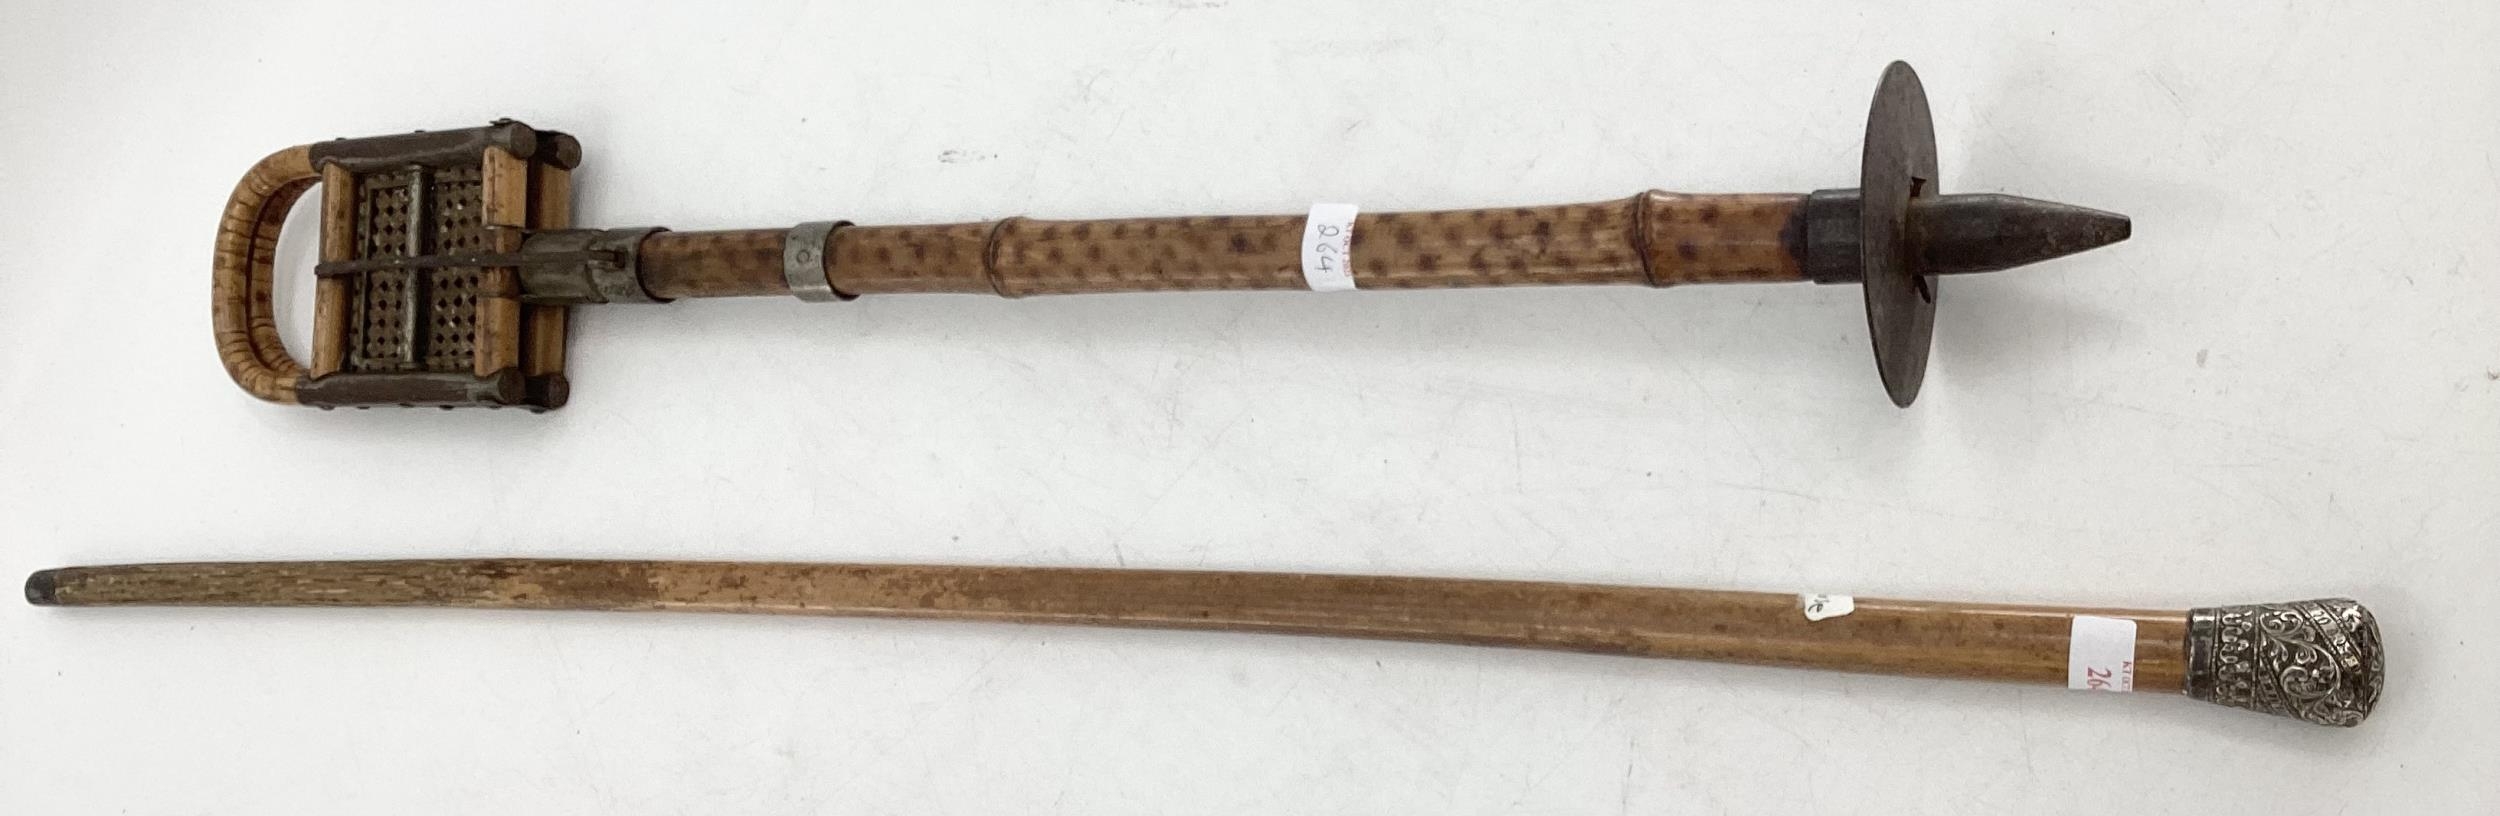 Bamboo shooting stick and a silver topped swagger stick/cane